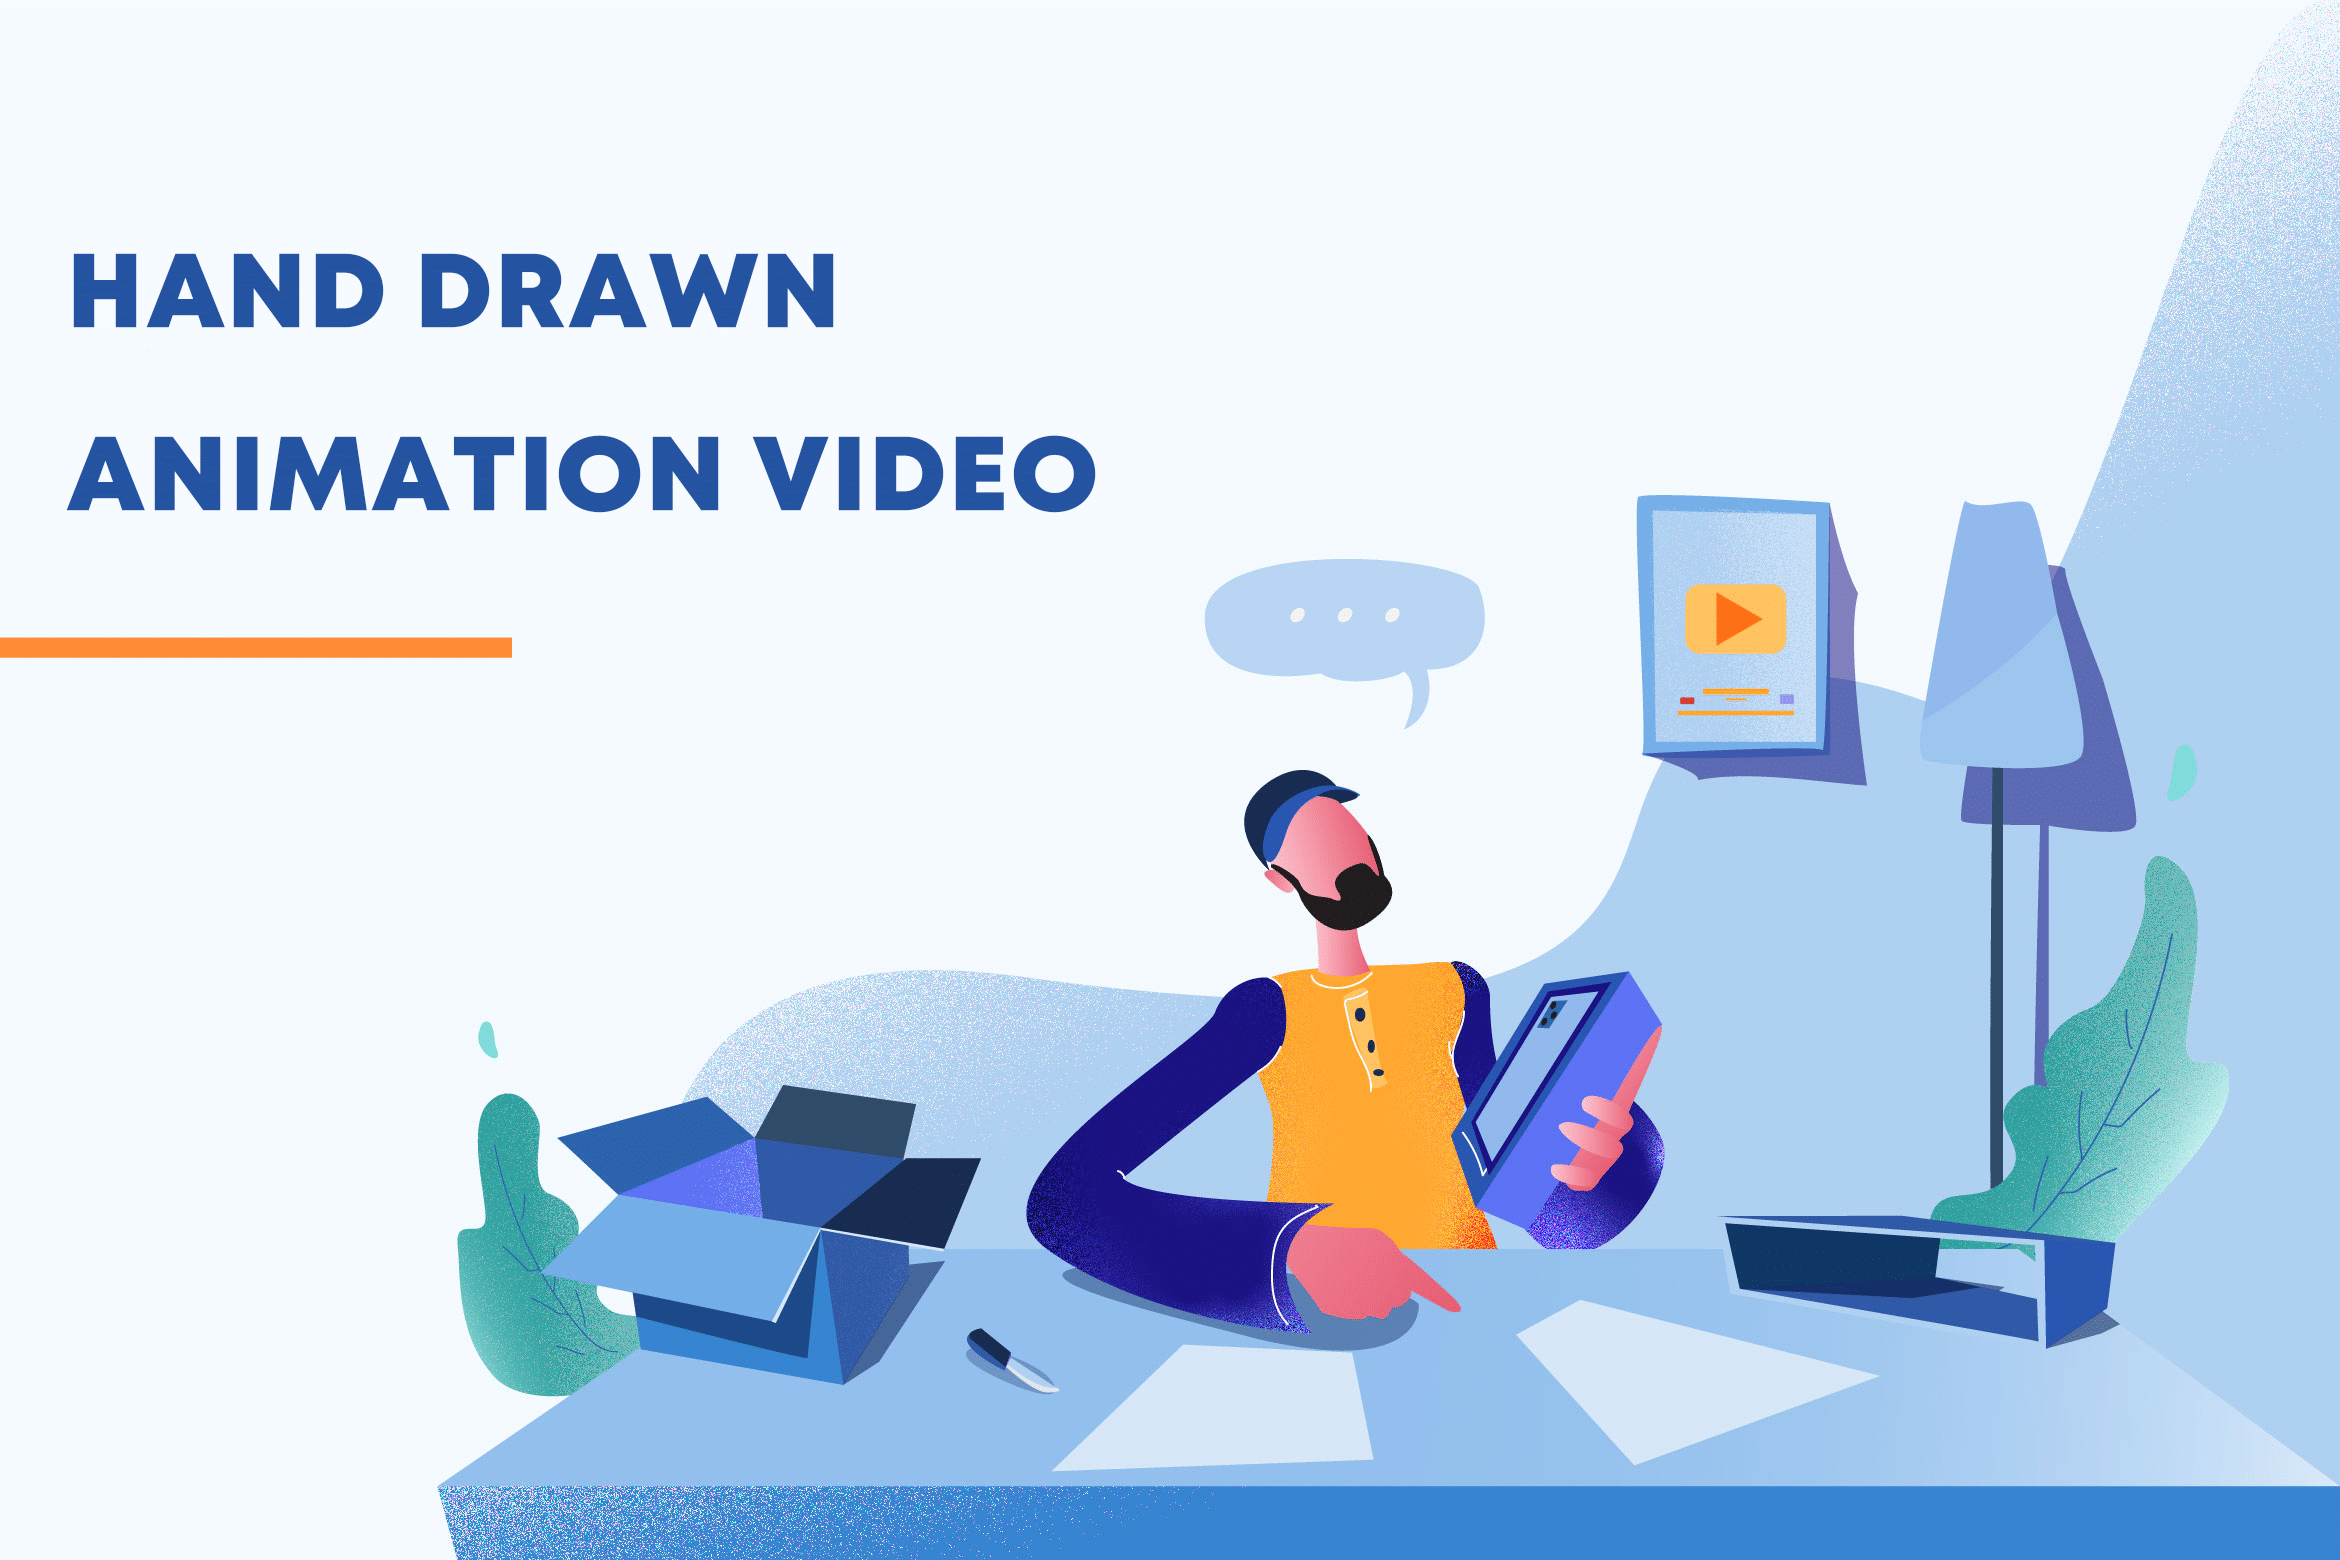 Create Hand Drawn Animation Video In A Snap - Mango Animation University